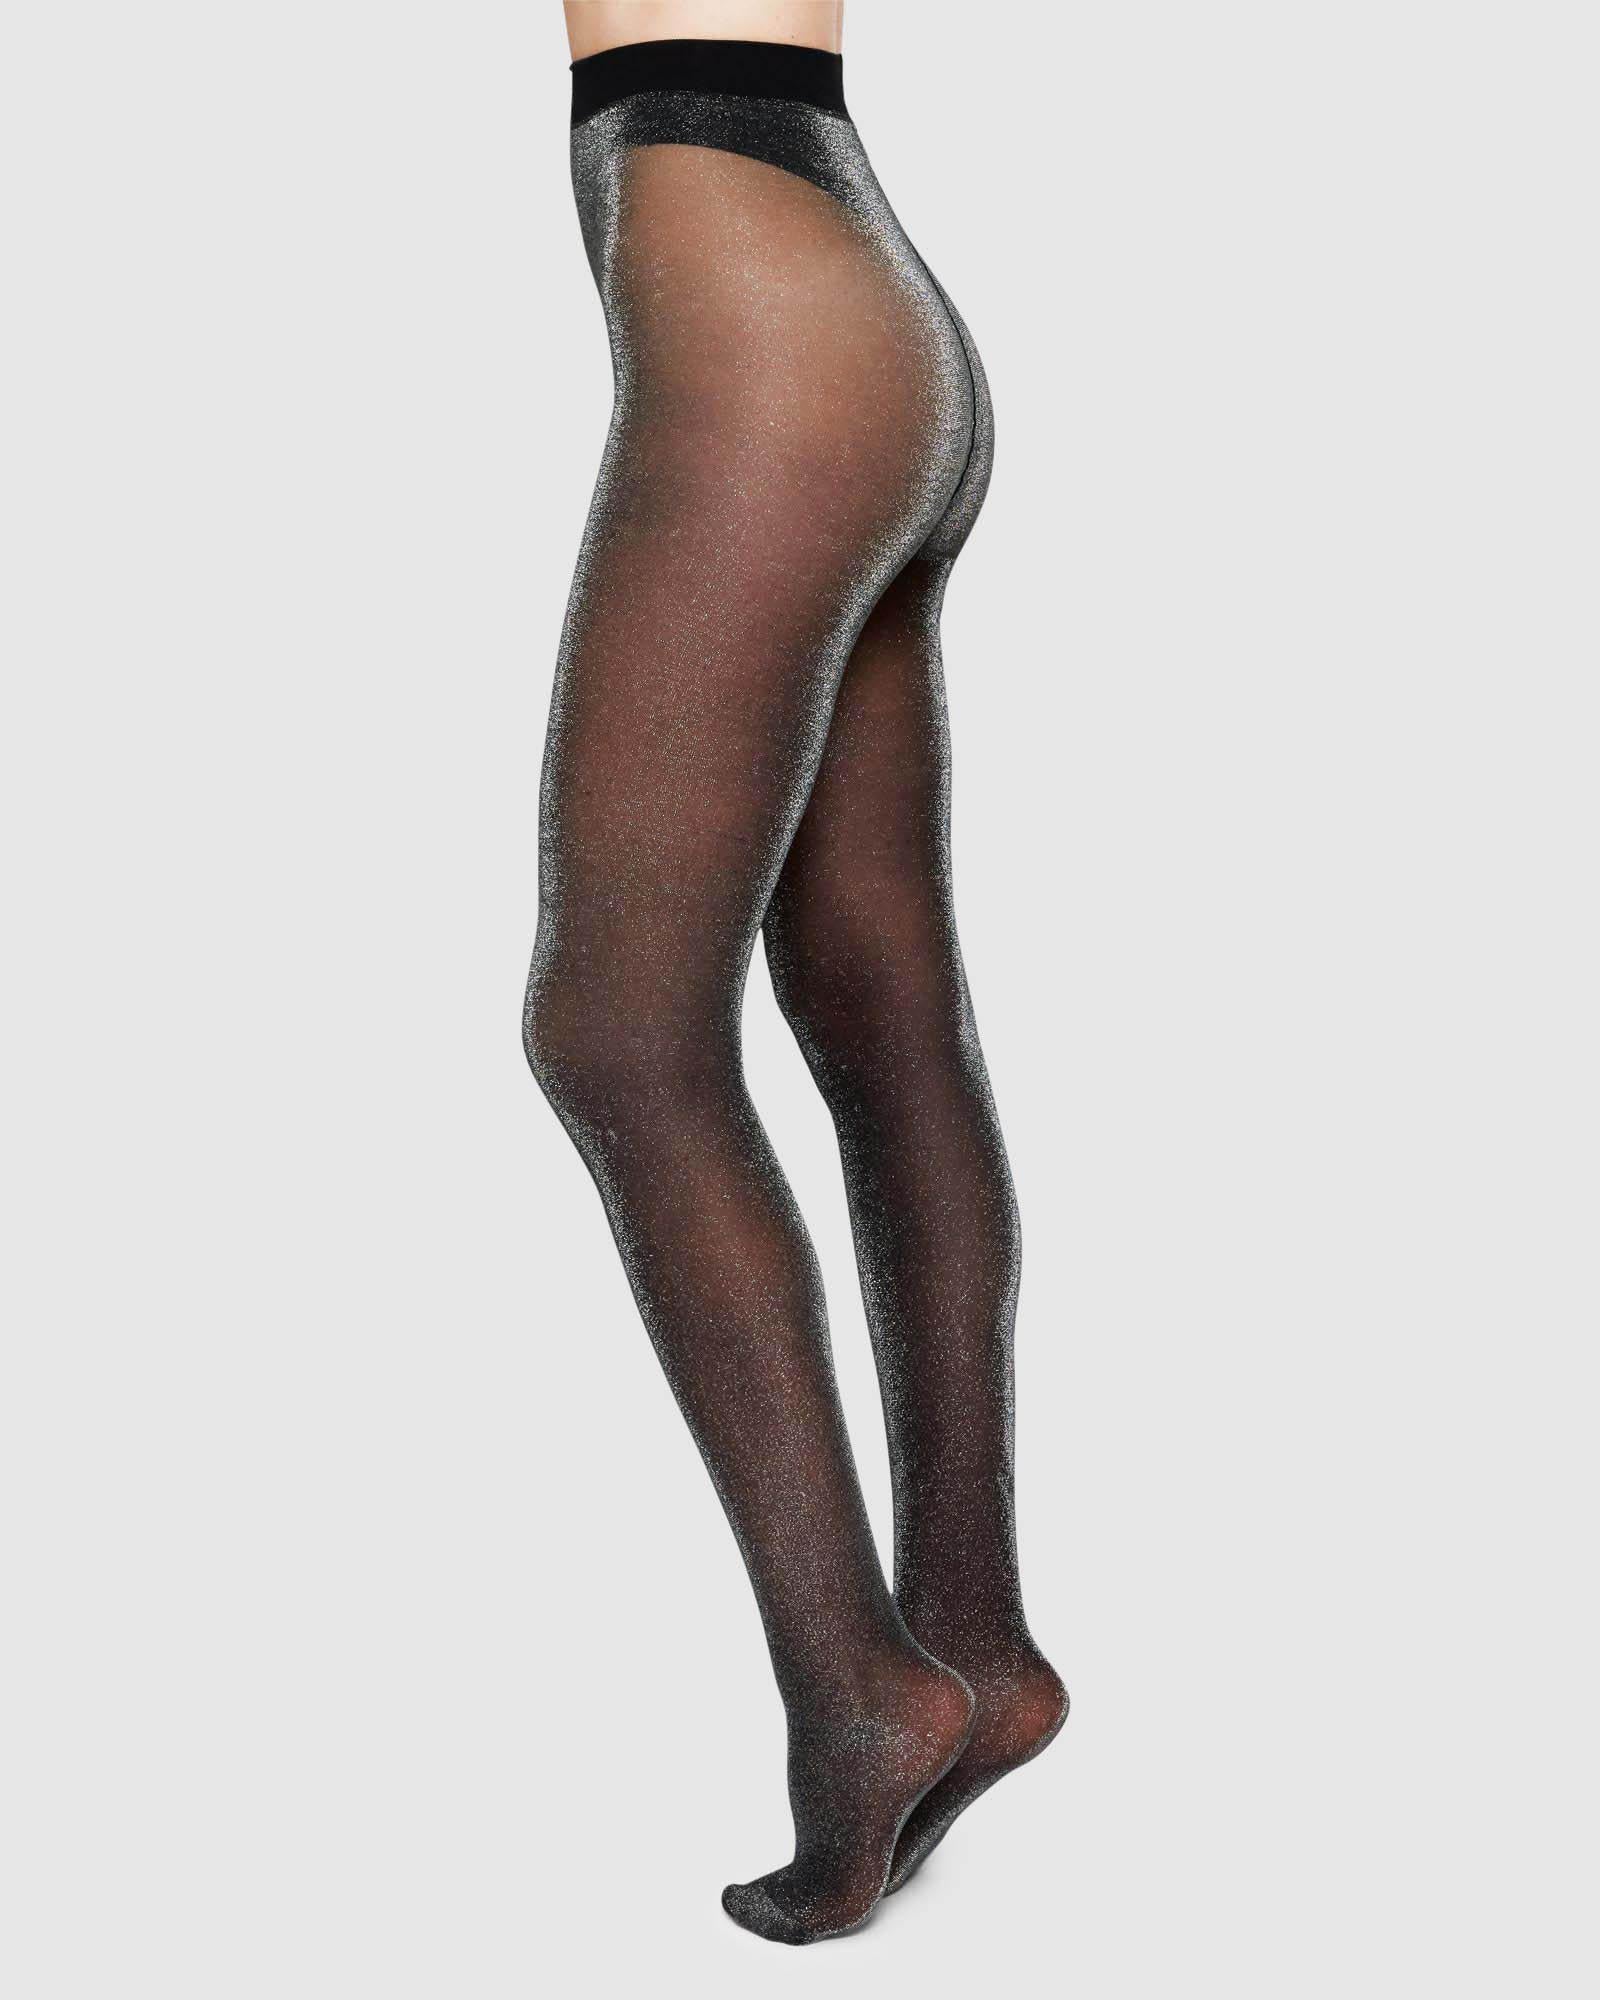 GLITTER SHIMMER TIGHTS, Black With Silver Sparkle, Panyhose Stockings -   Finland